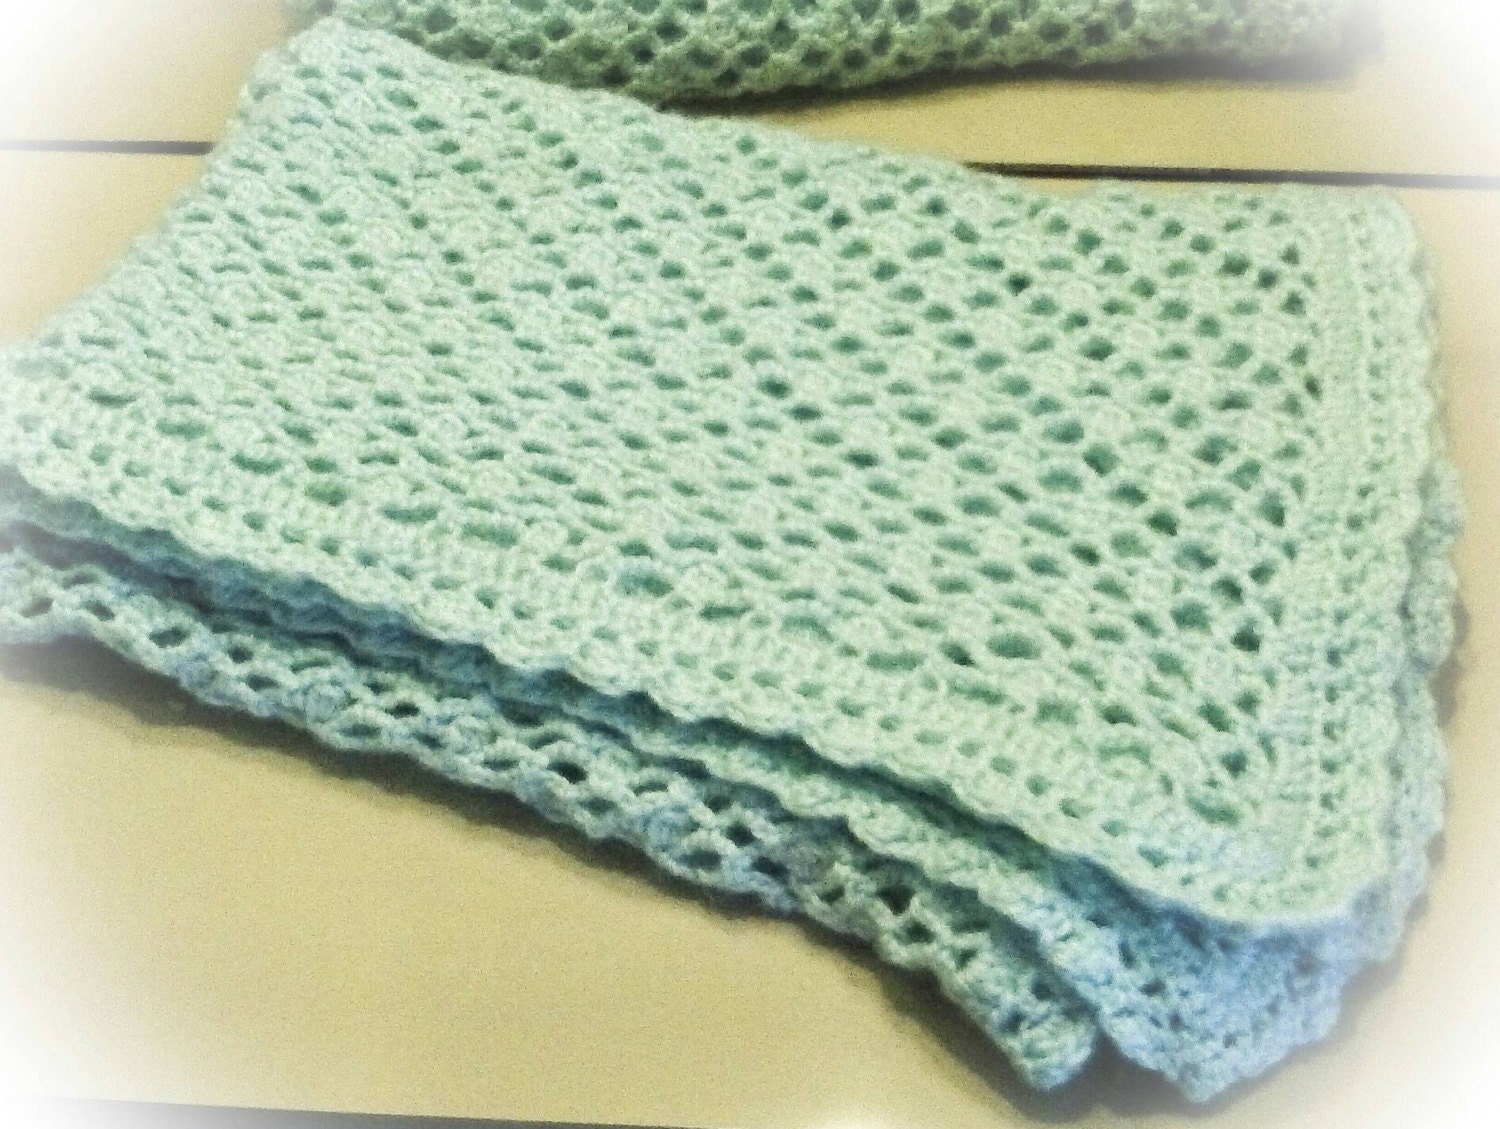 Soft lacy crochet baby blanket baby shower by PurtisfulLoopsbyJess